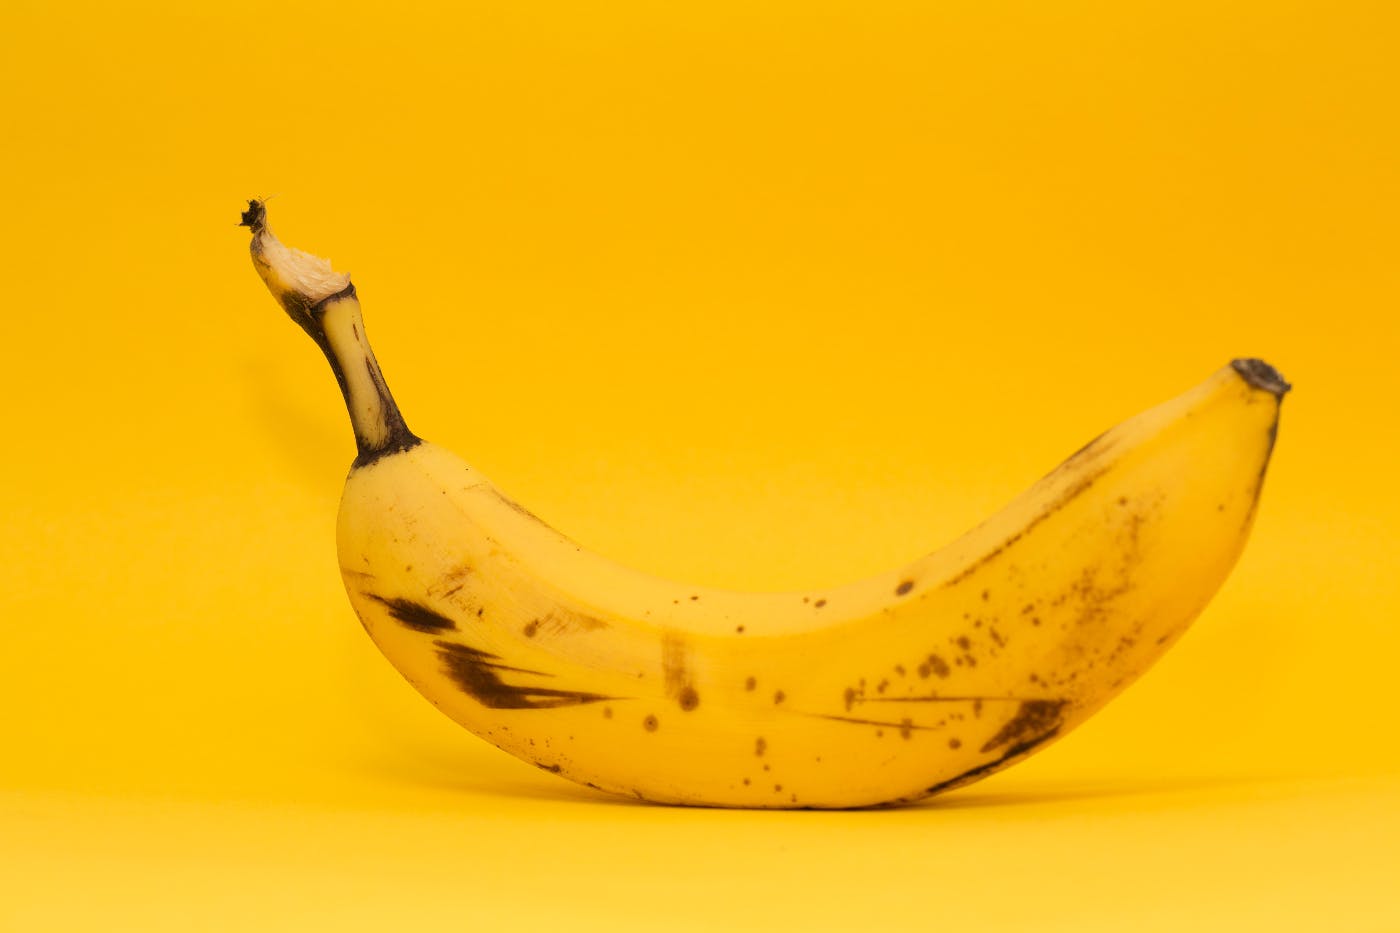 a bruised banana on a yellow background